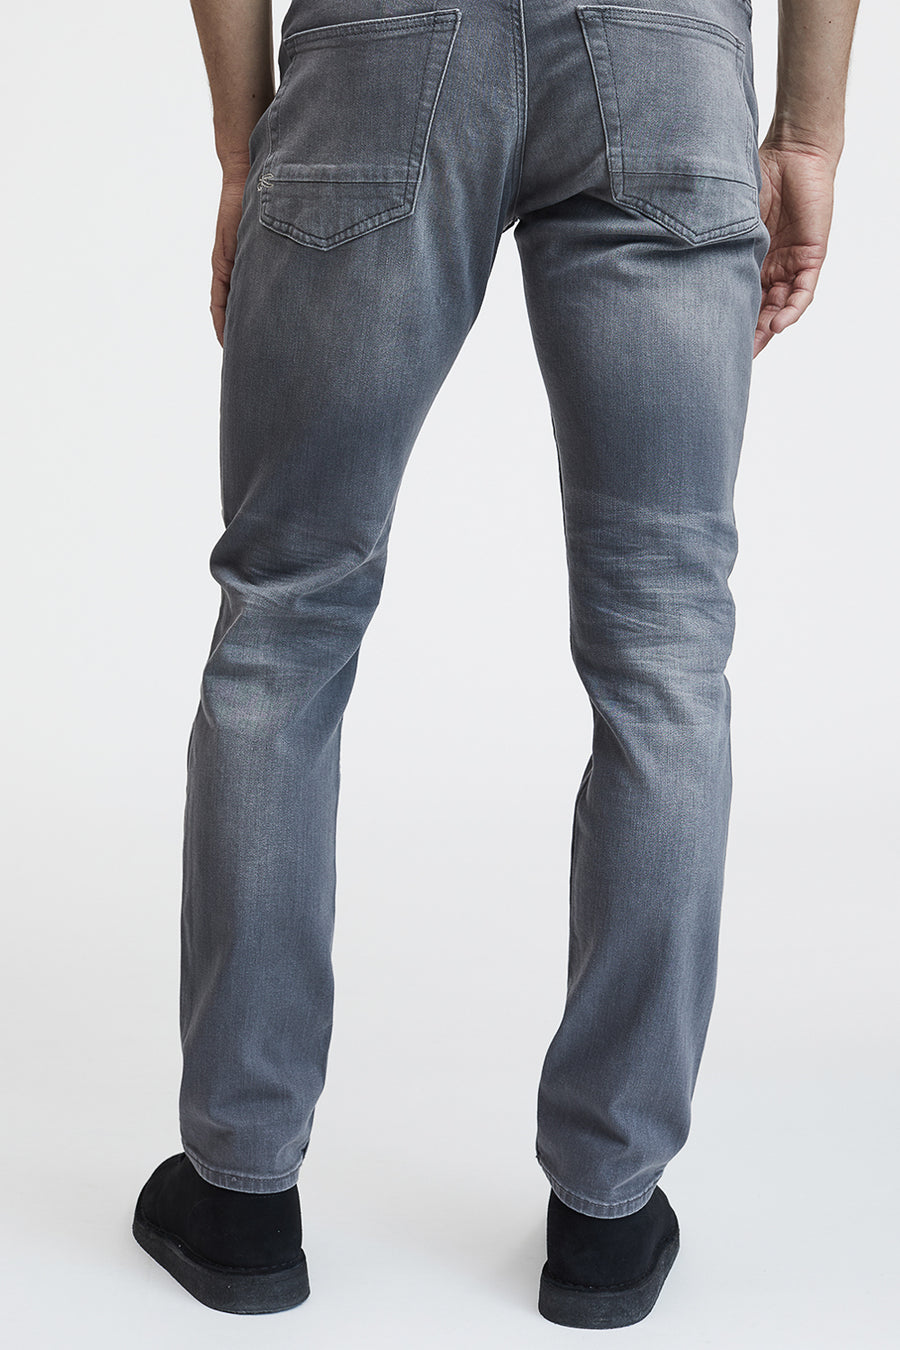 Buy the Denham Razor Aceg Jeans in Grey at Intro. Spend £50 for free UK delivery. Official stockists. We ship worldwide.